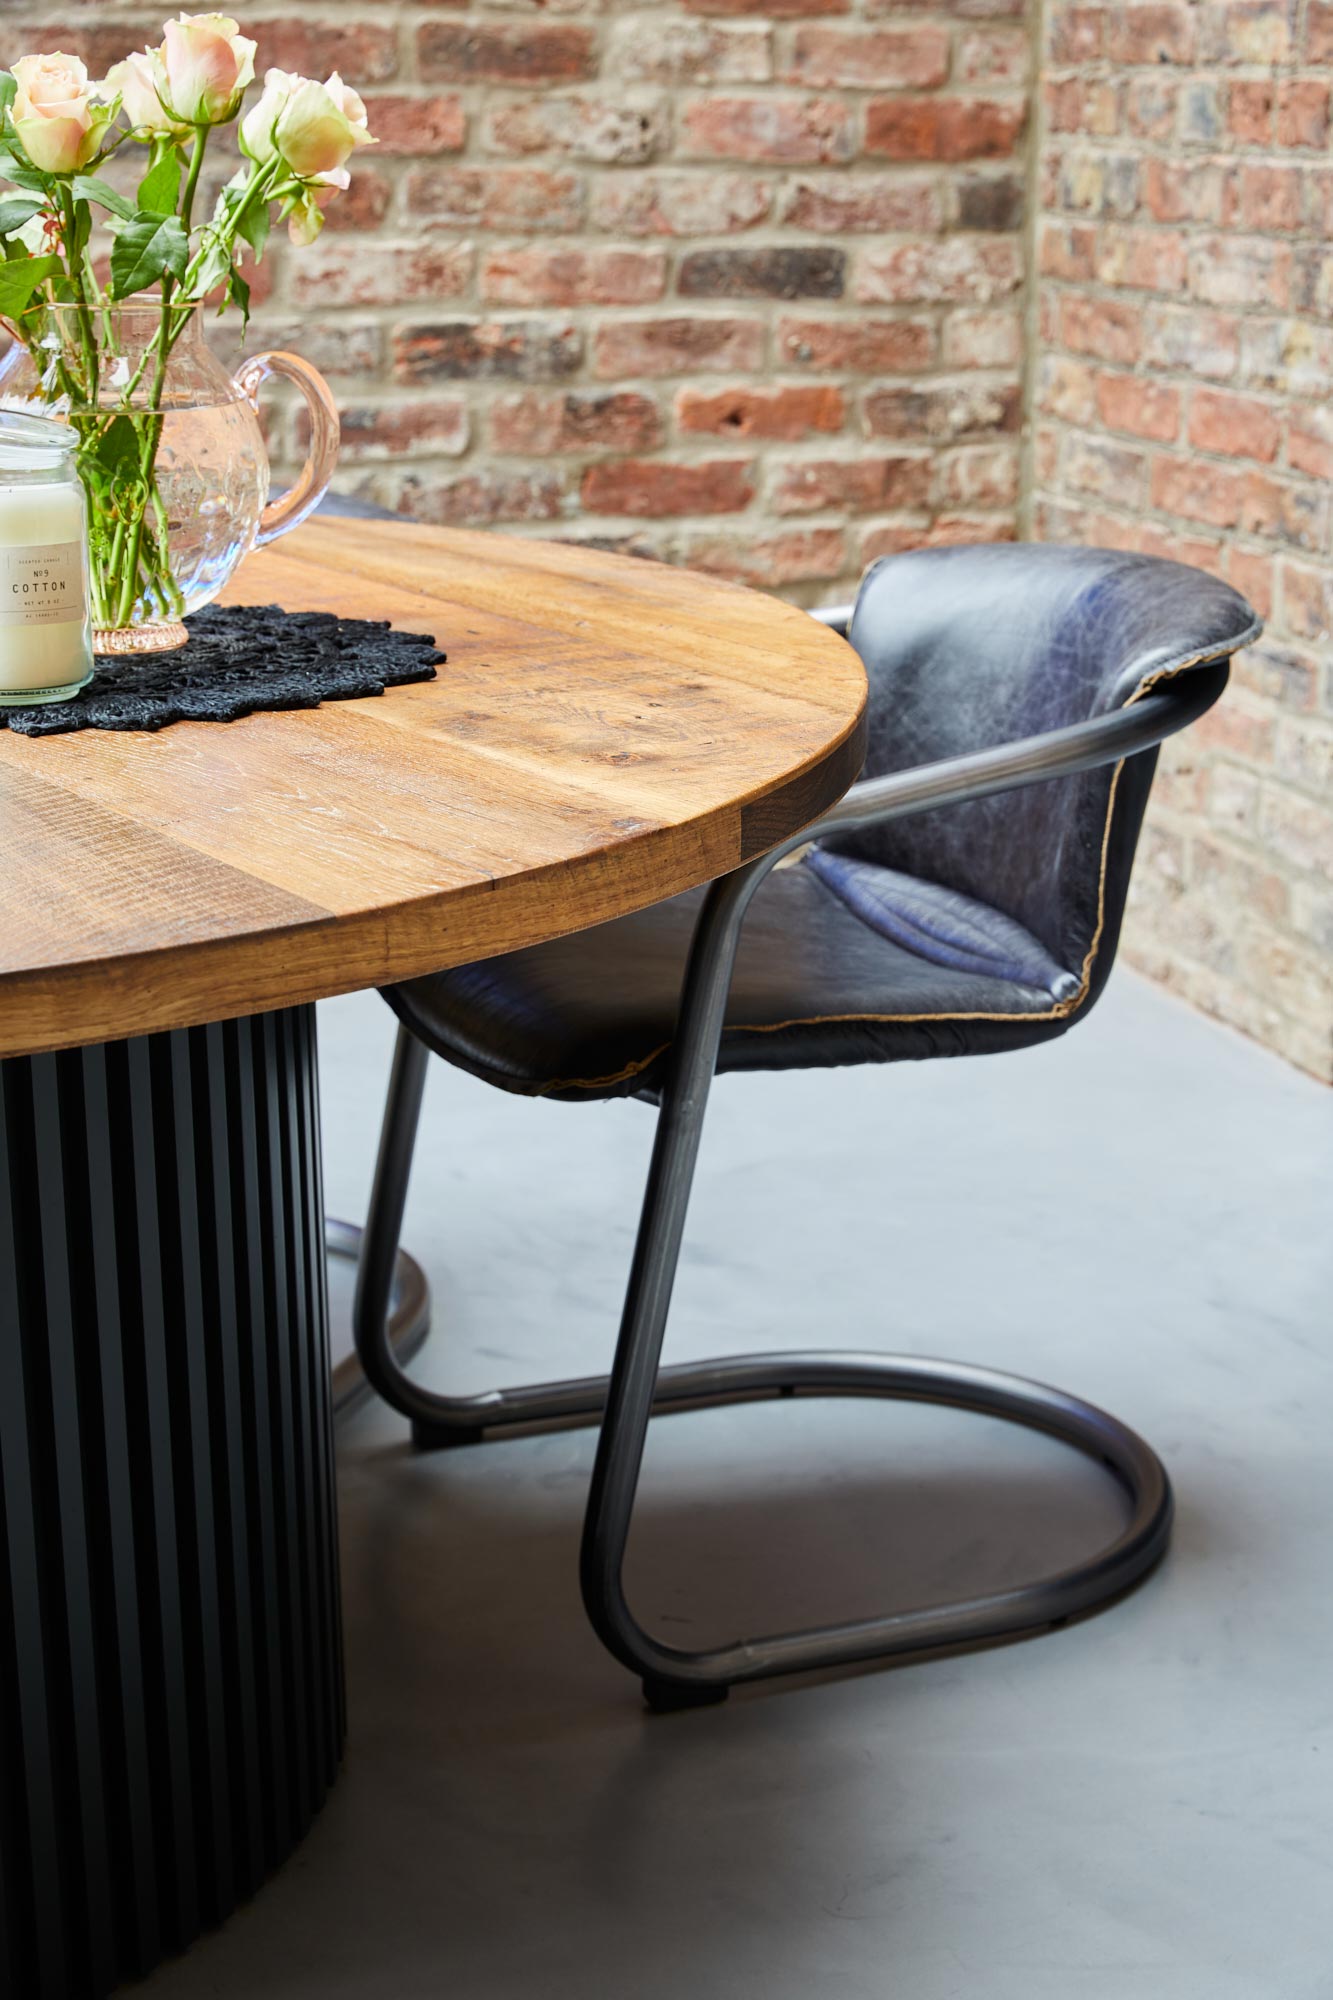 Industrial dining chair